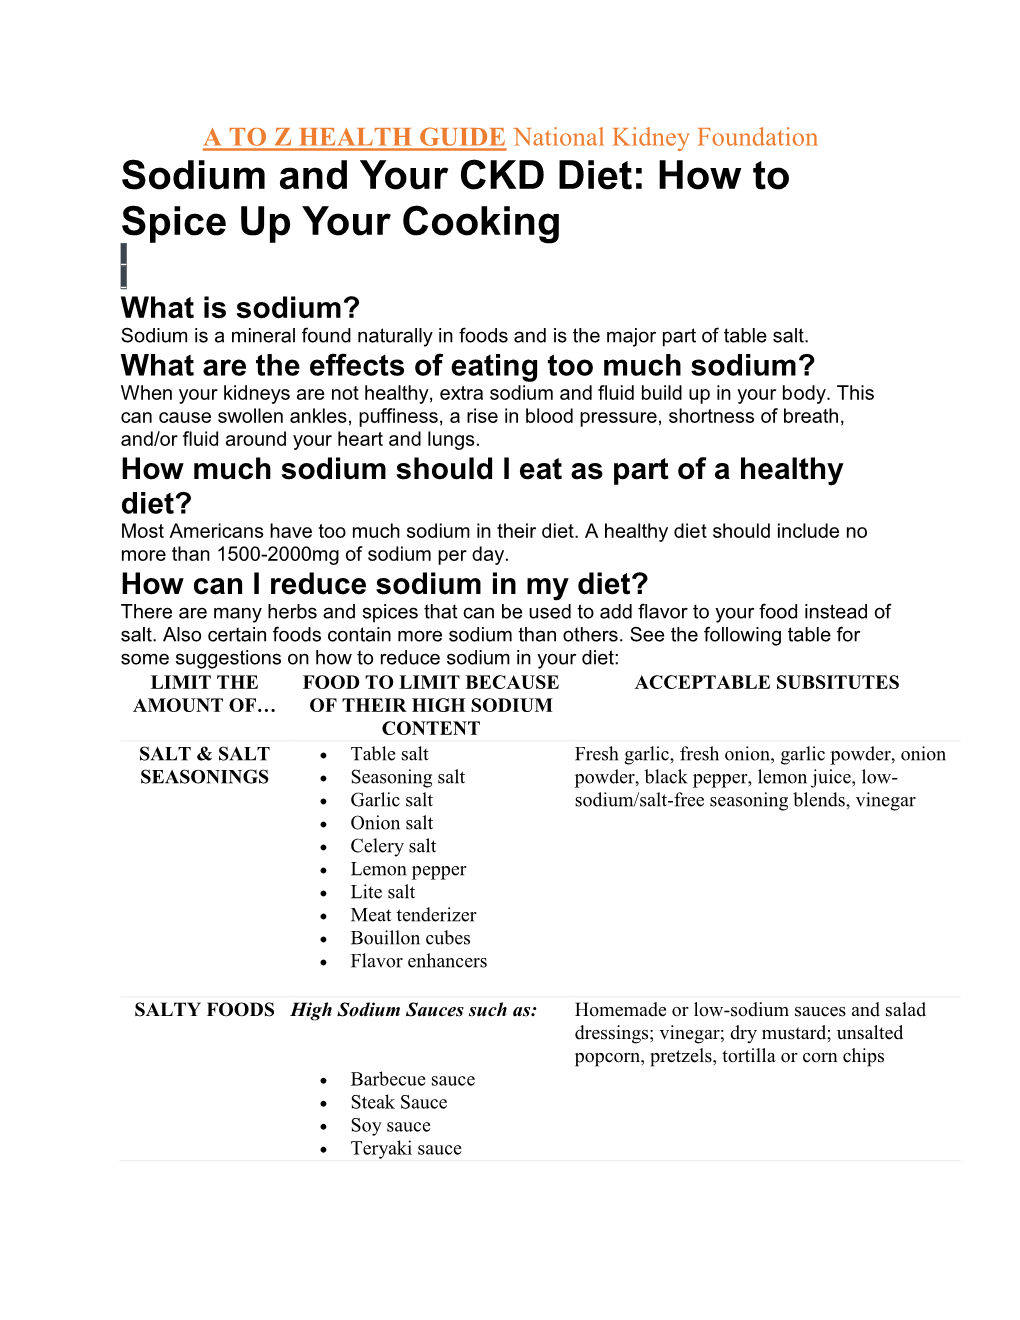 Sodium and Your CKD Diet: How to Spice up Your Cooking